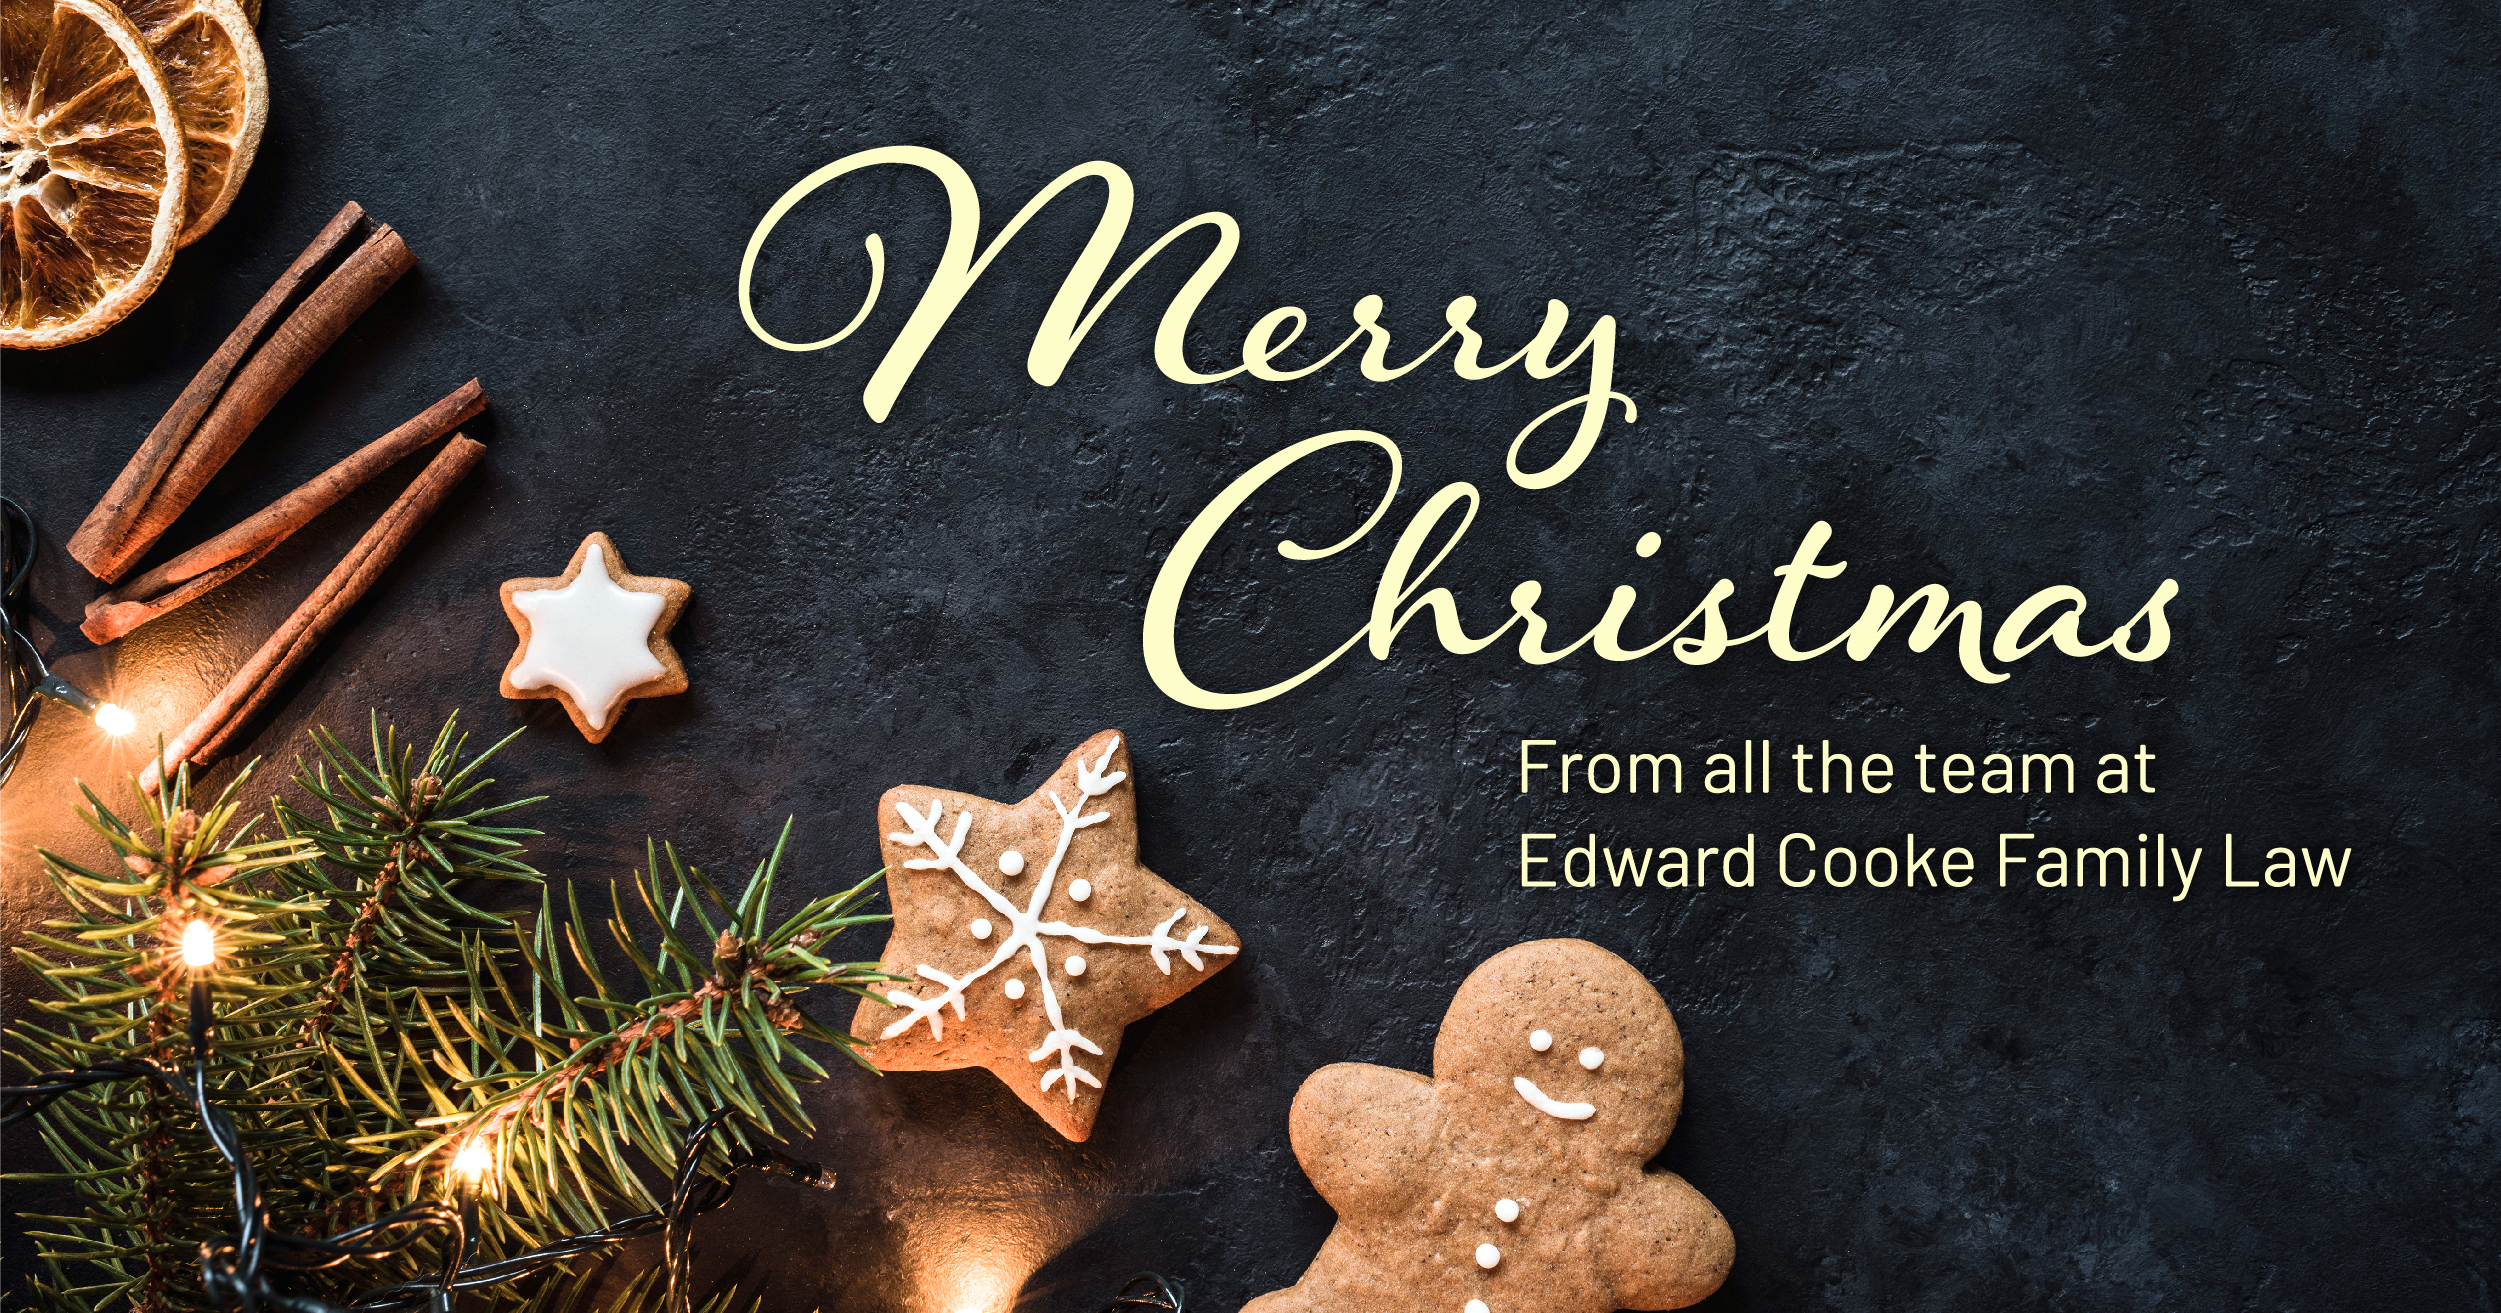 Merry Christmas from Edward Cooke Family Law